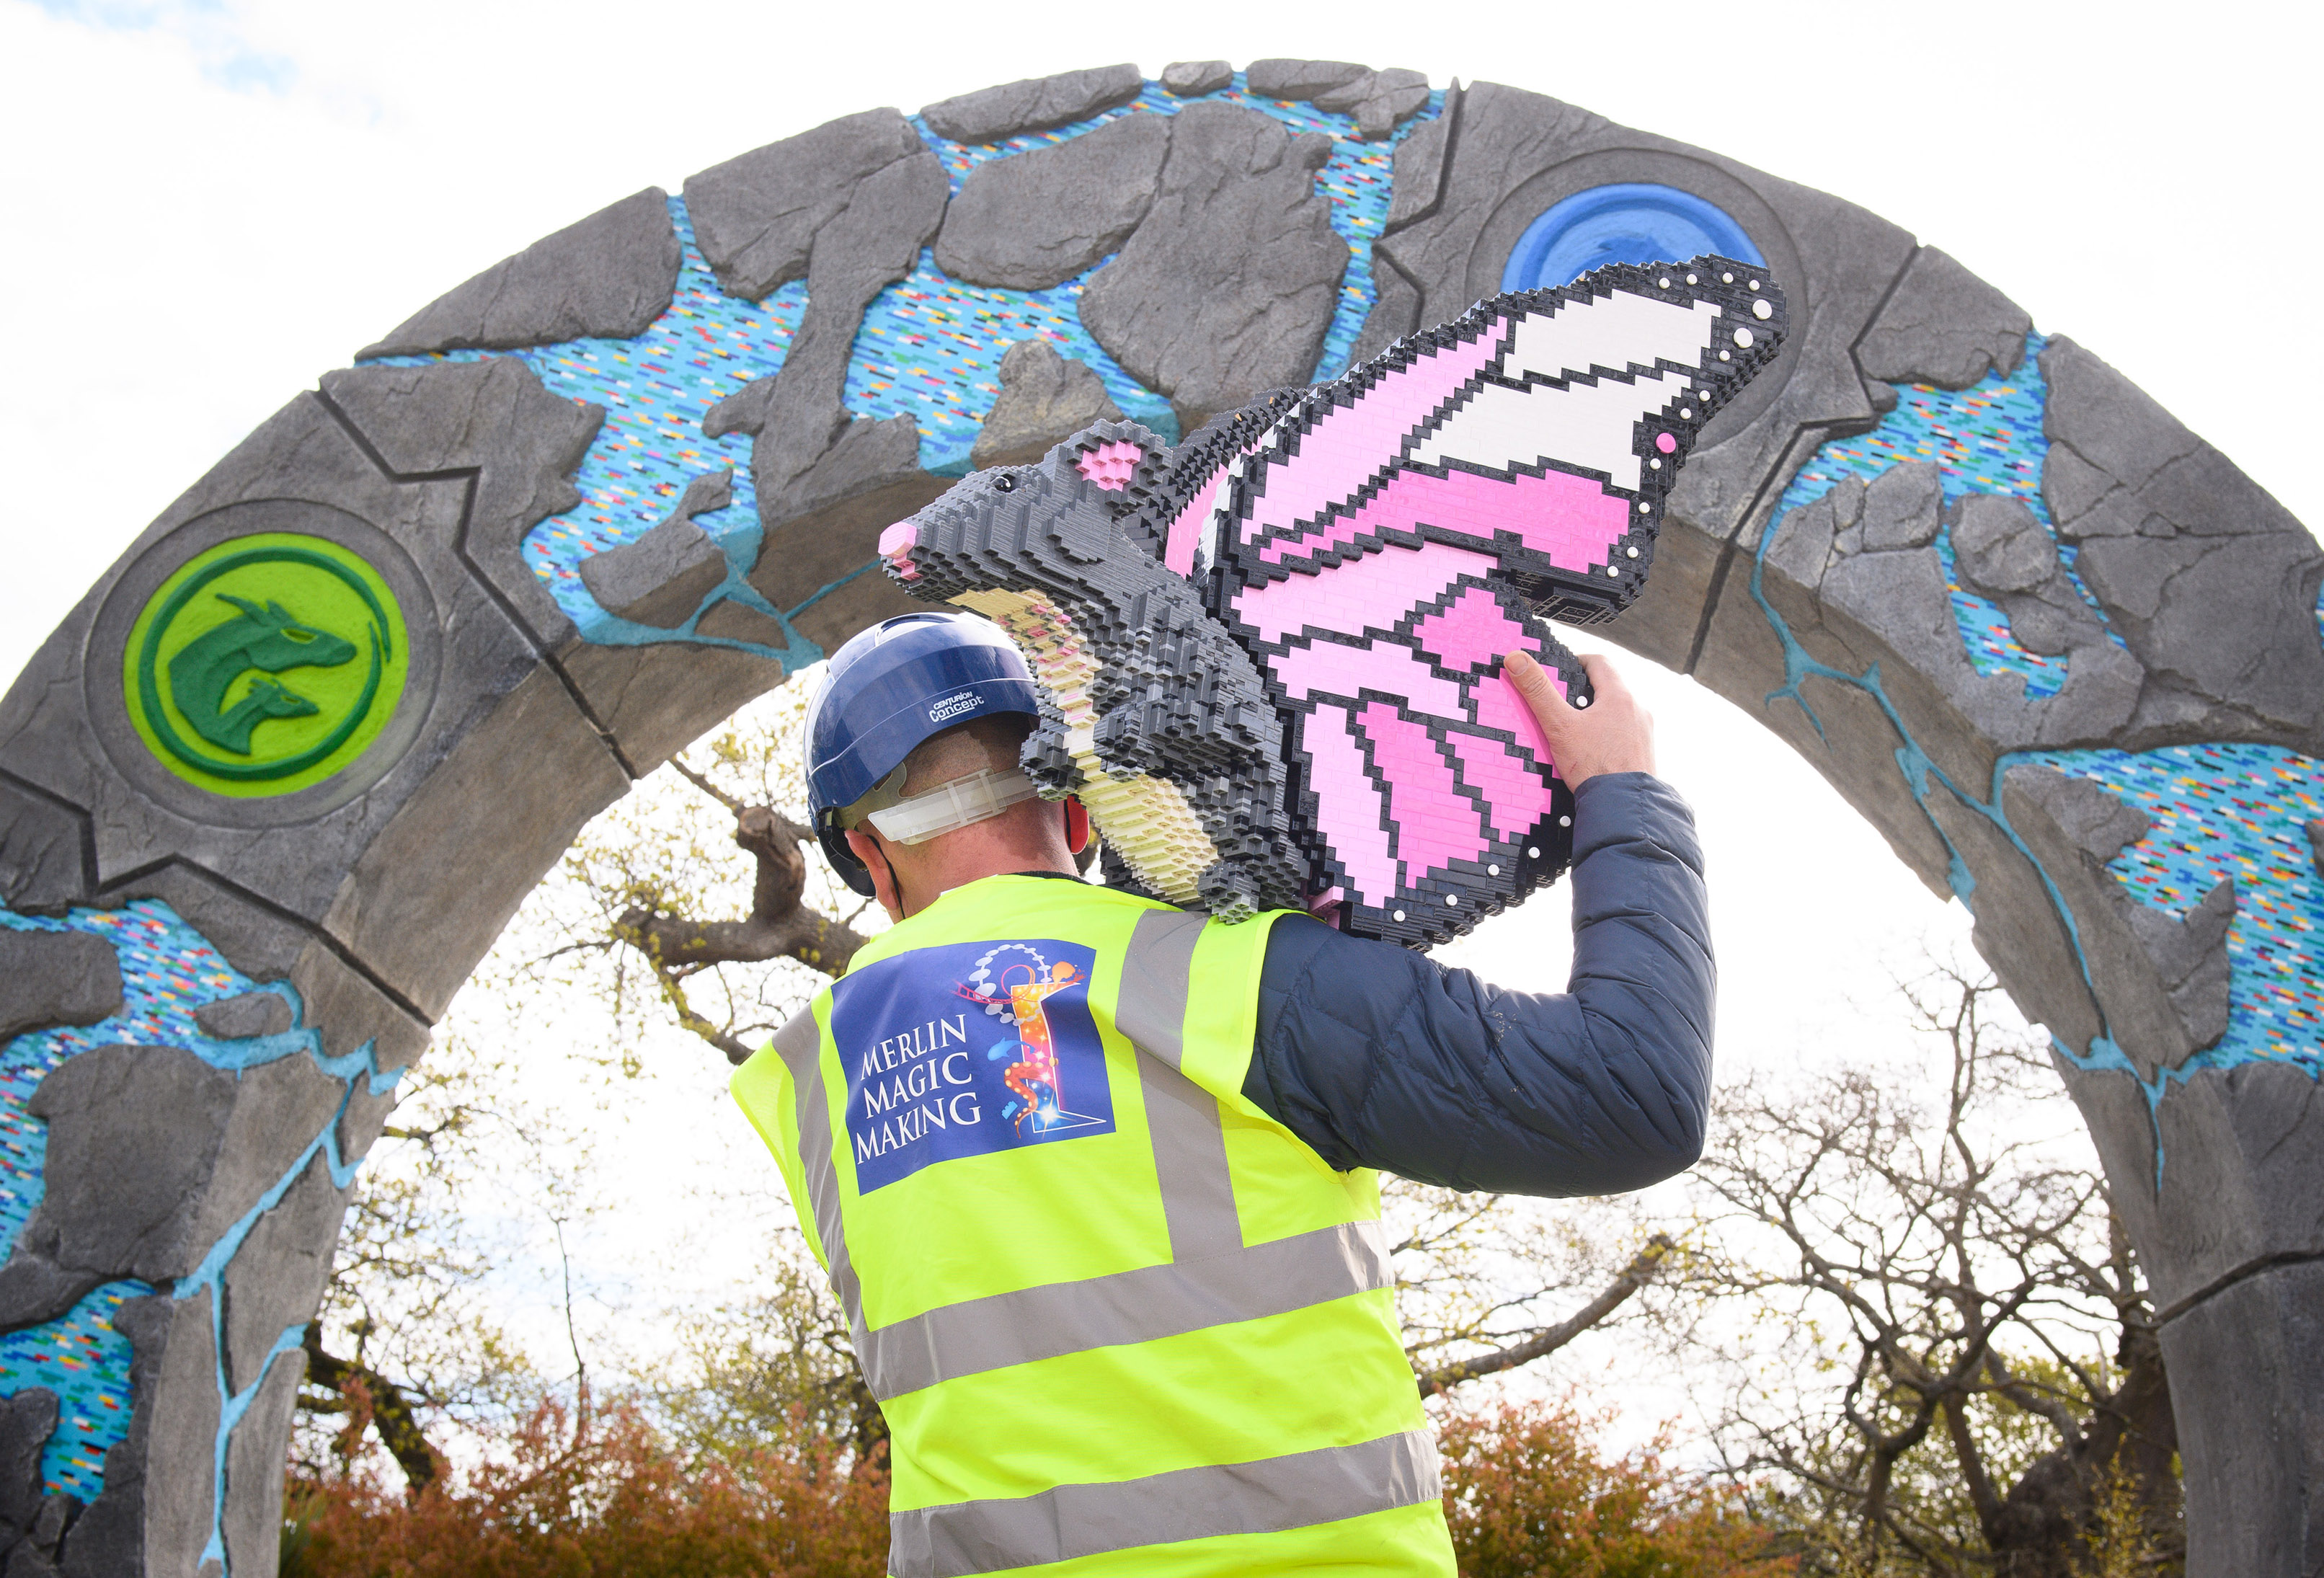 Adding finishing touches to Mouse-Butterfly LEGO Model in LEGO MYTHICA at the LEGOLAND Windsor Resort